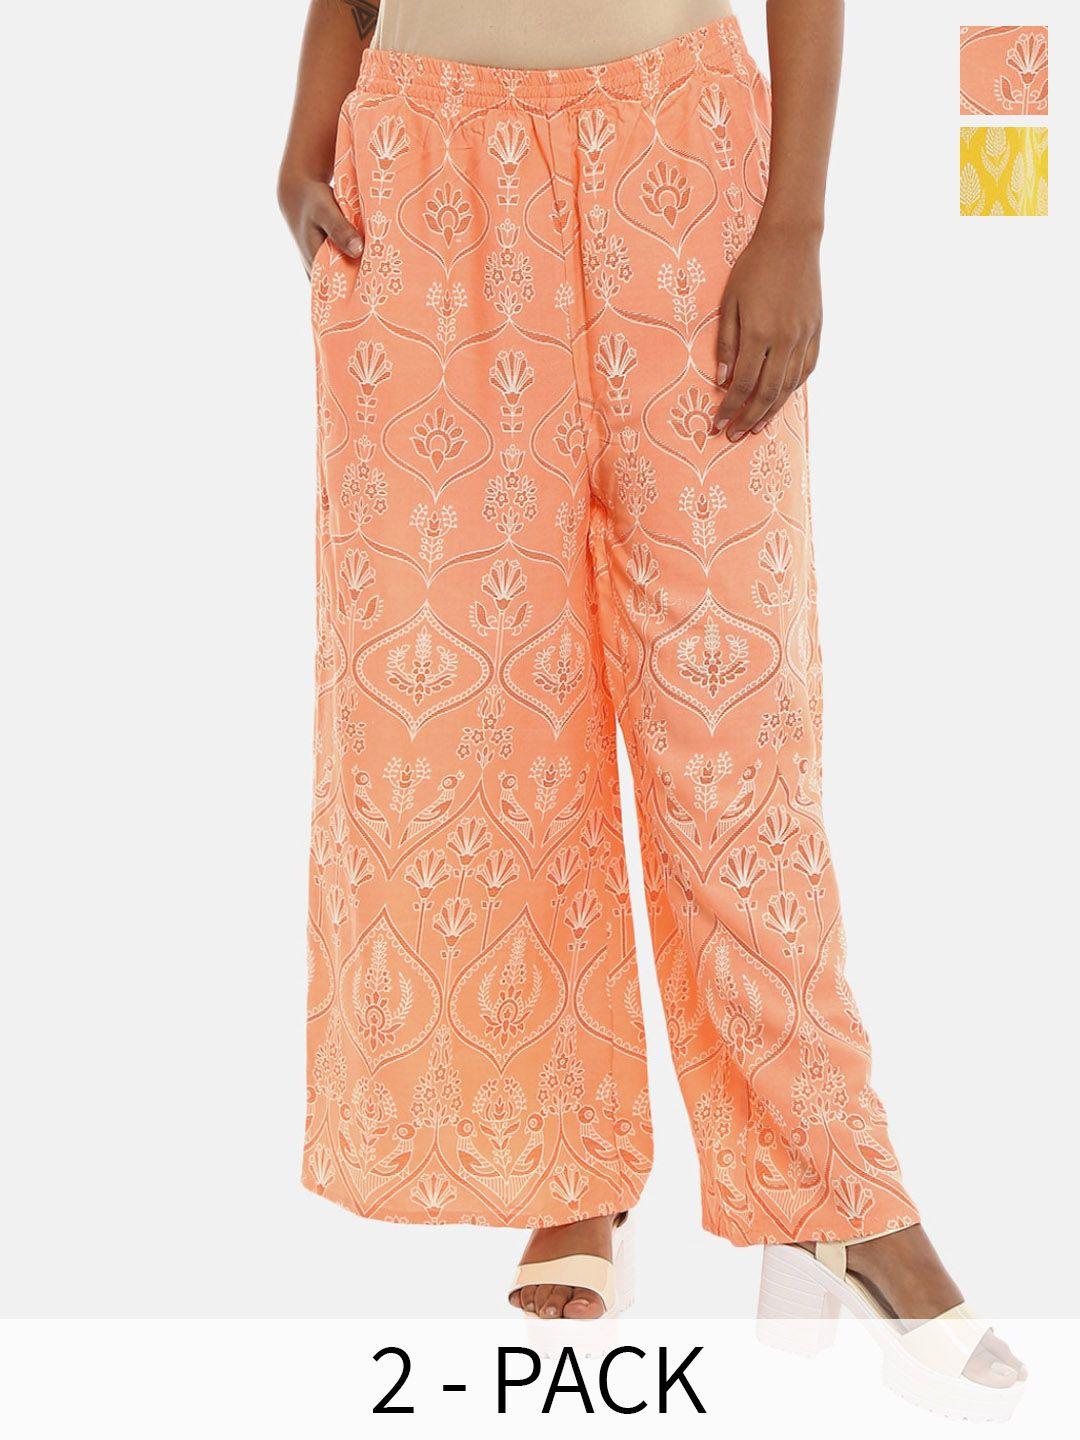 v-mart women yellow printed trousers